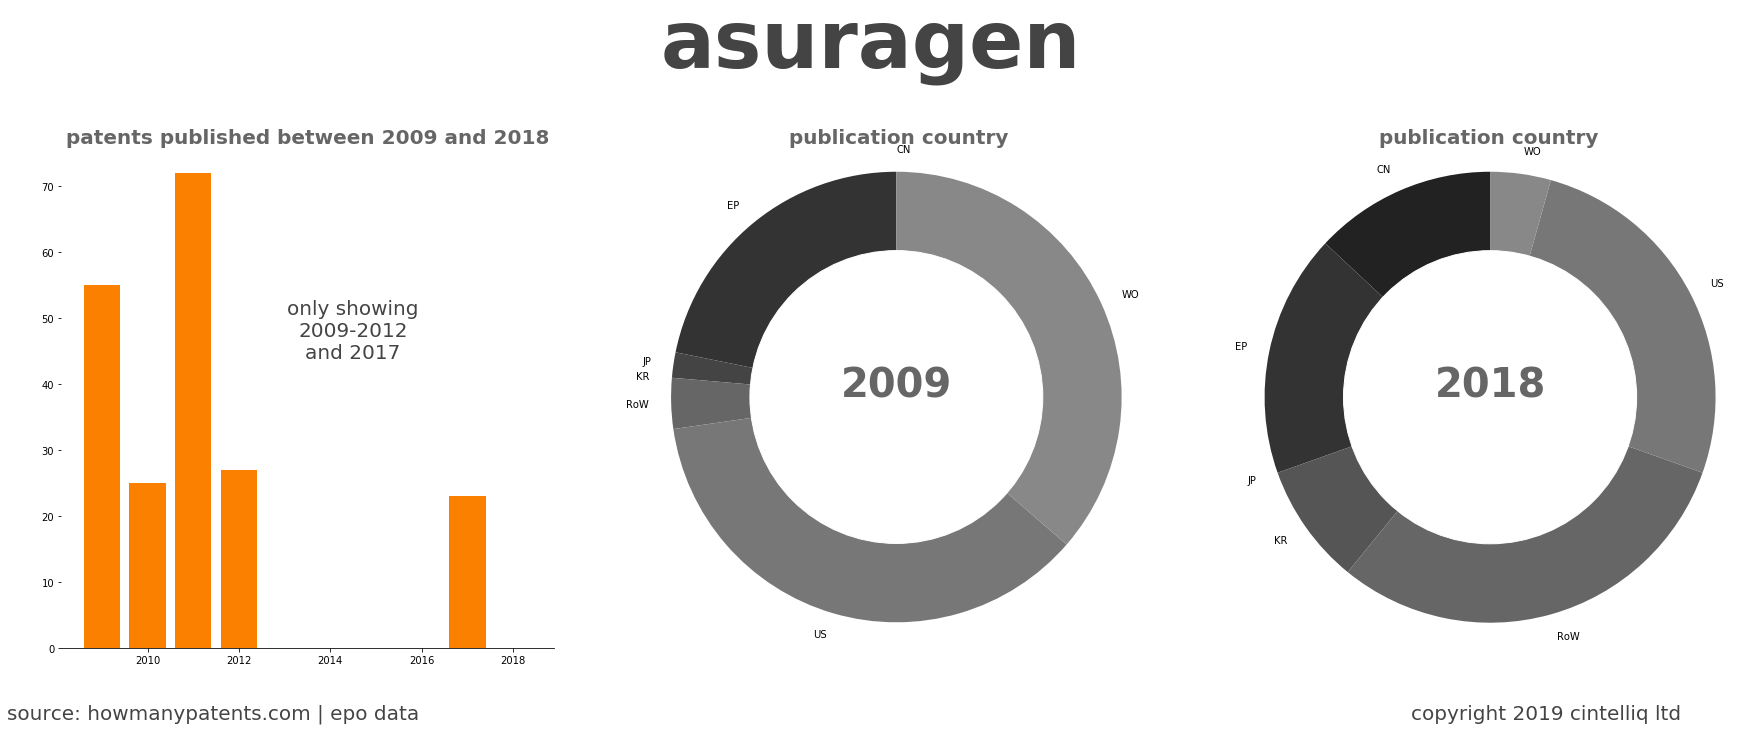 summary of patents for Asuragen